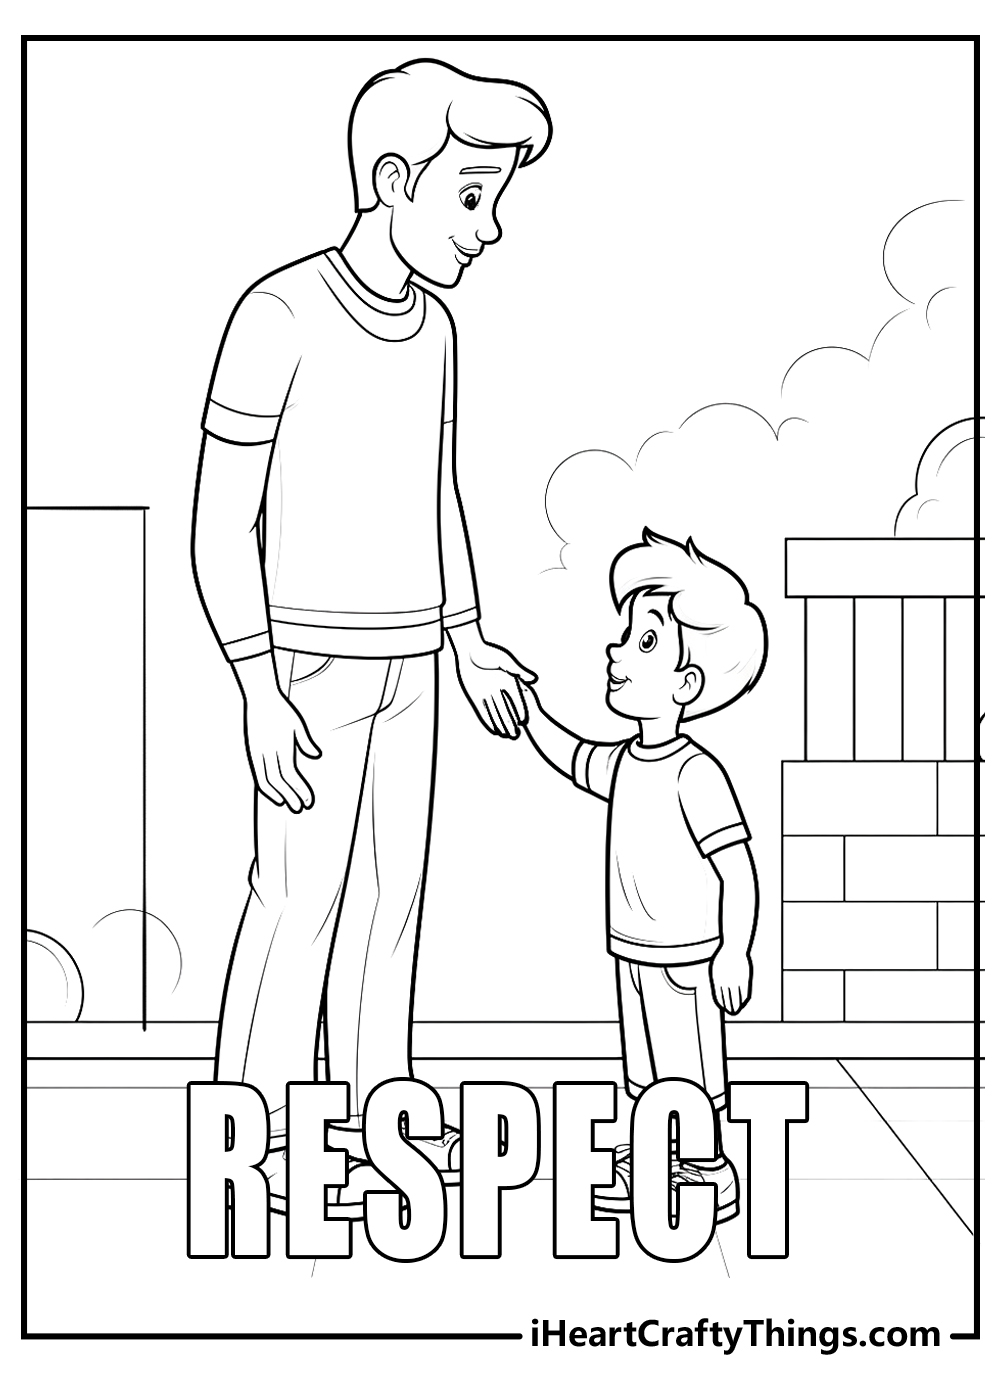 Printable kindness coloring pages updated